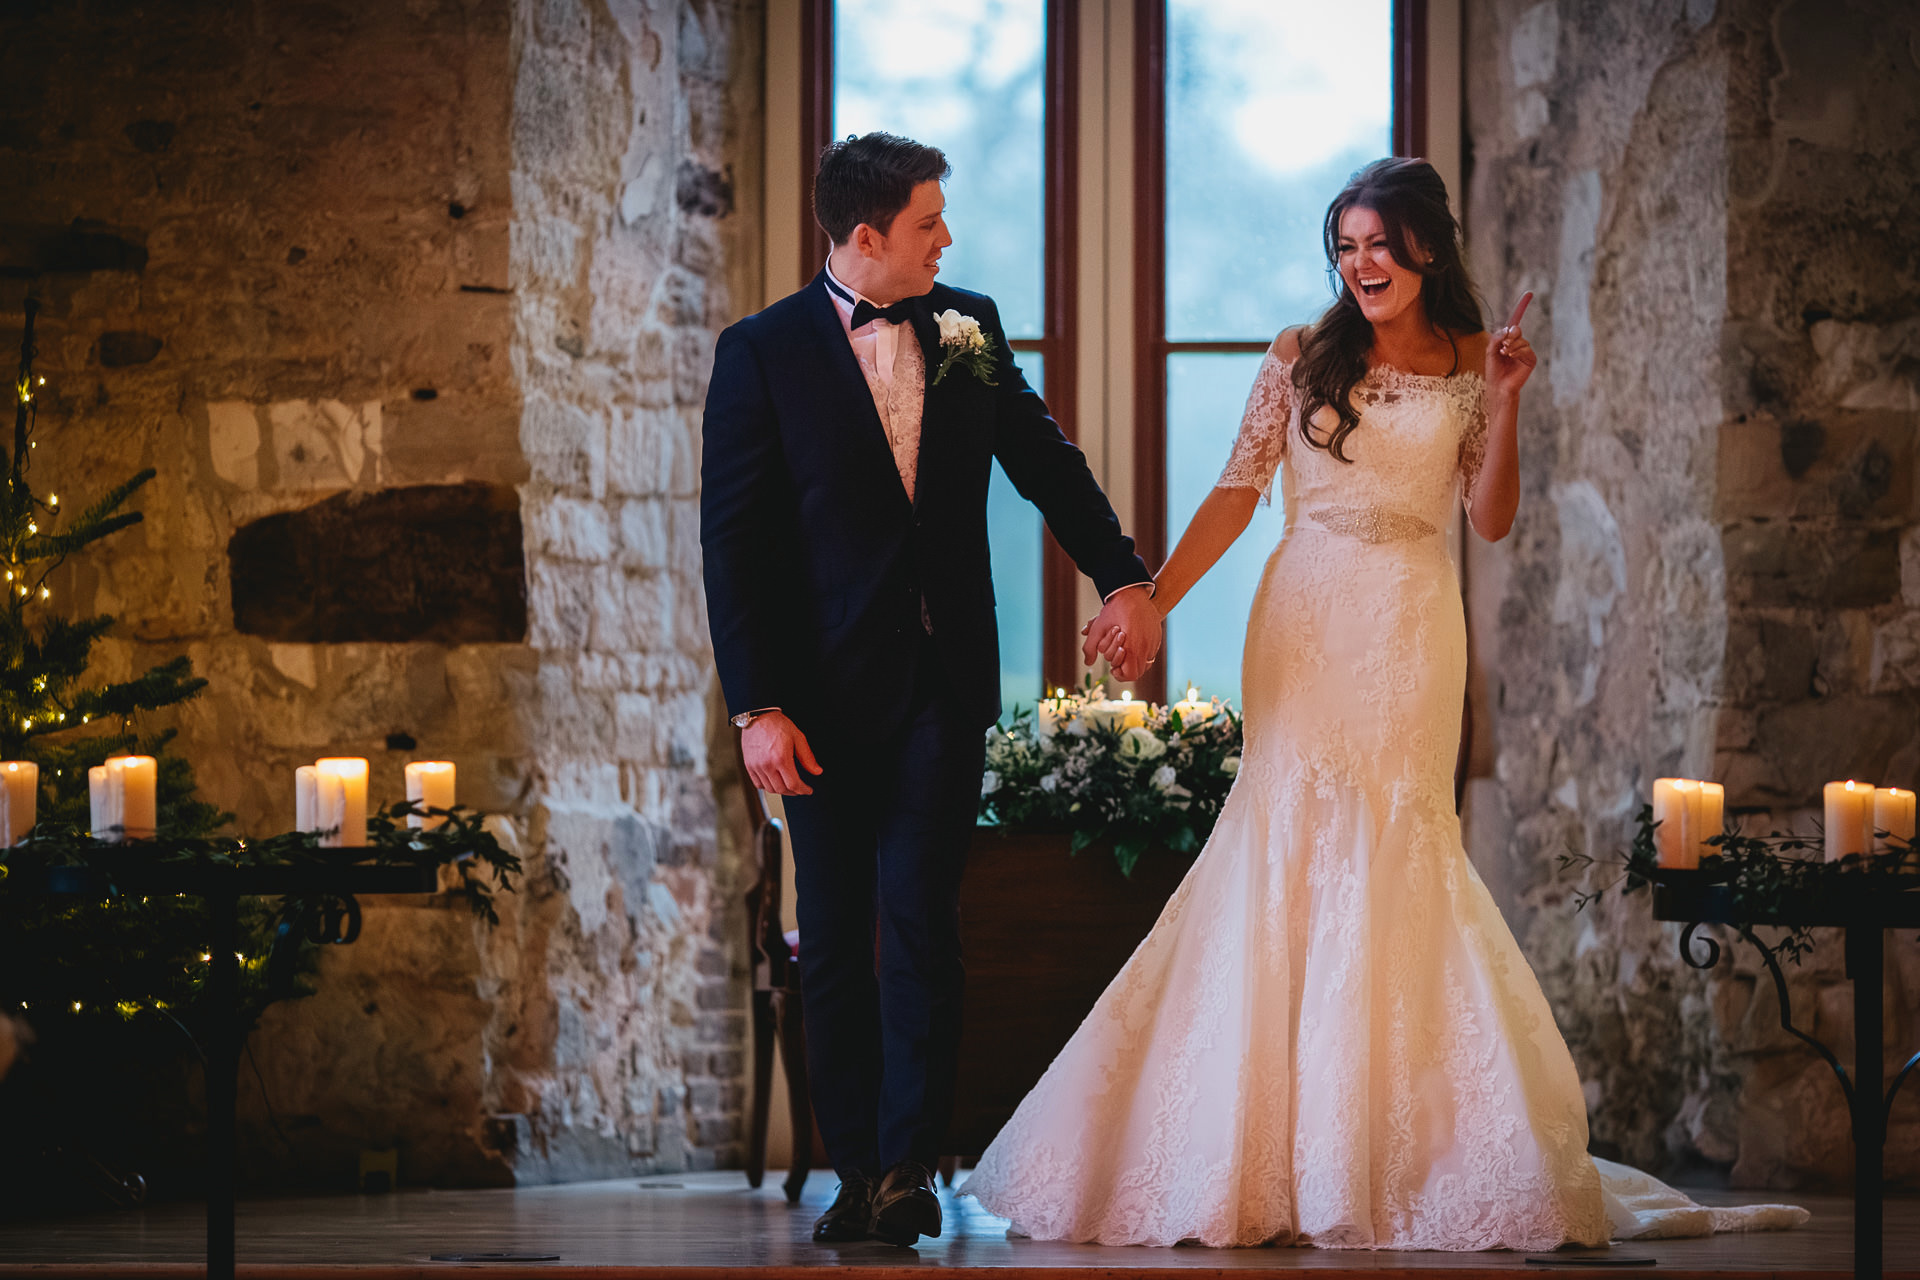 A bride and groom just married at a winter Lulworth Castle wedding in Dorset